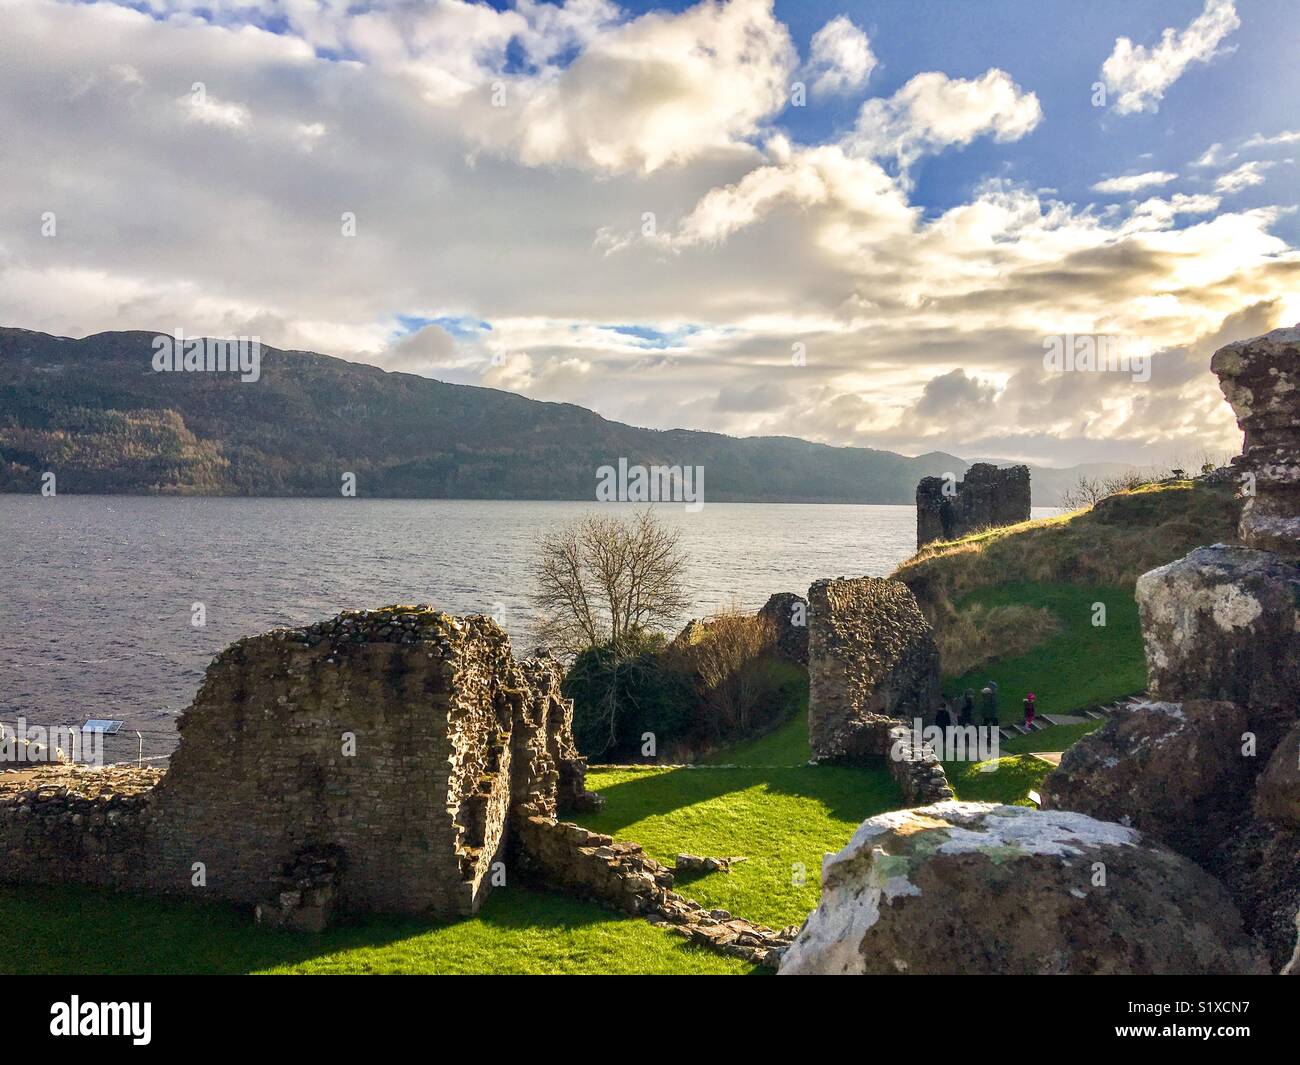 A photo of Urquhart Castle overlooking Loch Ness in Scotland, UK Stock Photo